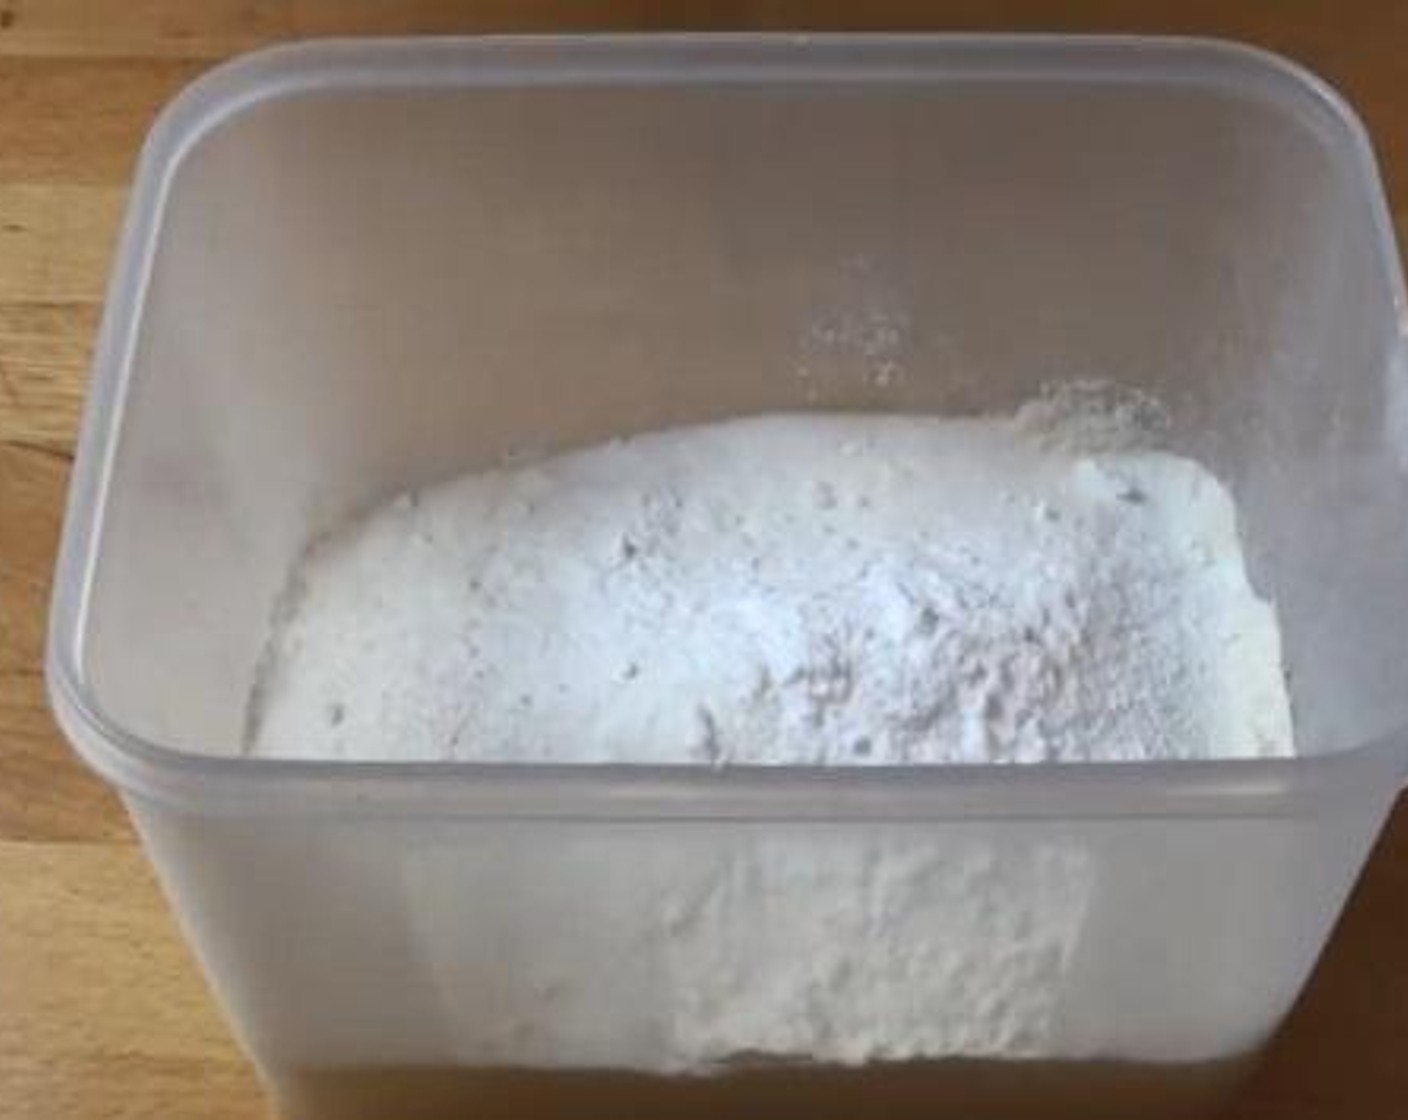 step 1 In a bowl, add and mix the All-Purpose Flour (4 cups), Granulated Sugar (1/4 cup), Baking Powder (1 Tbsp), Baking Soda (1/2 Tbsp), and Salt (1 tsp).